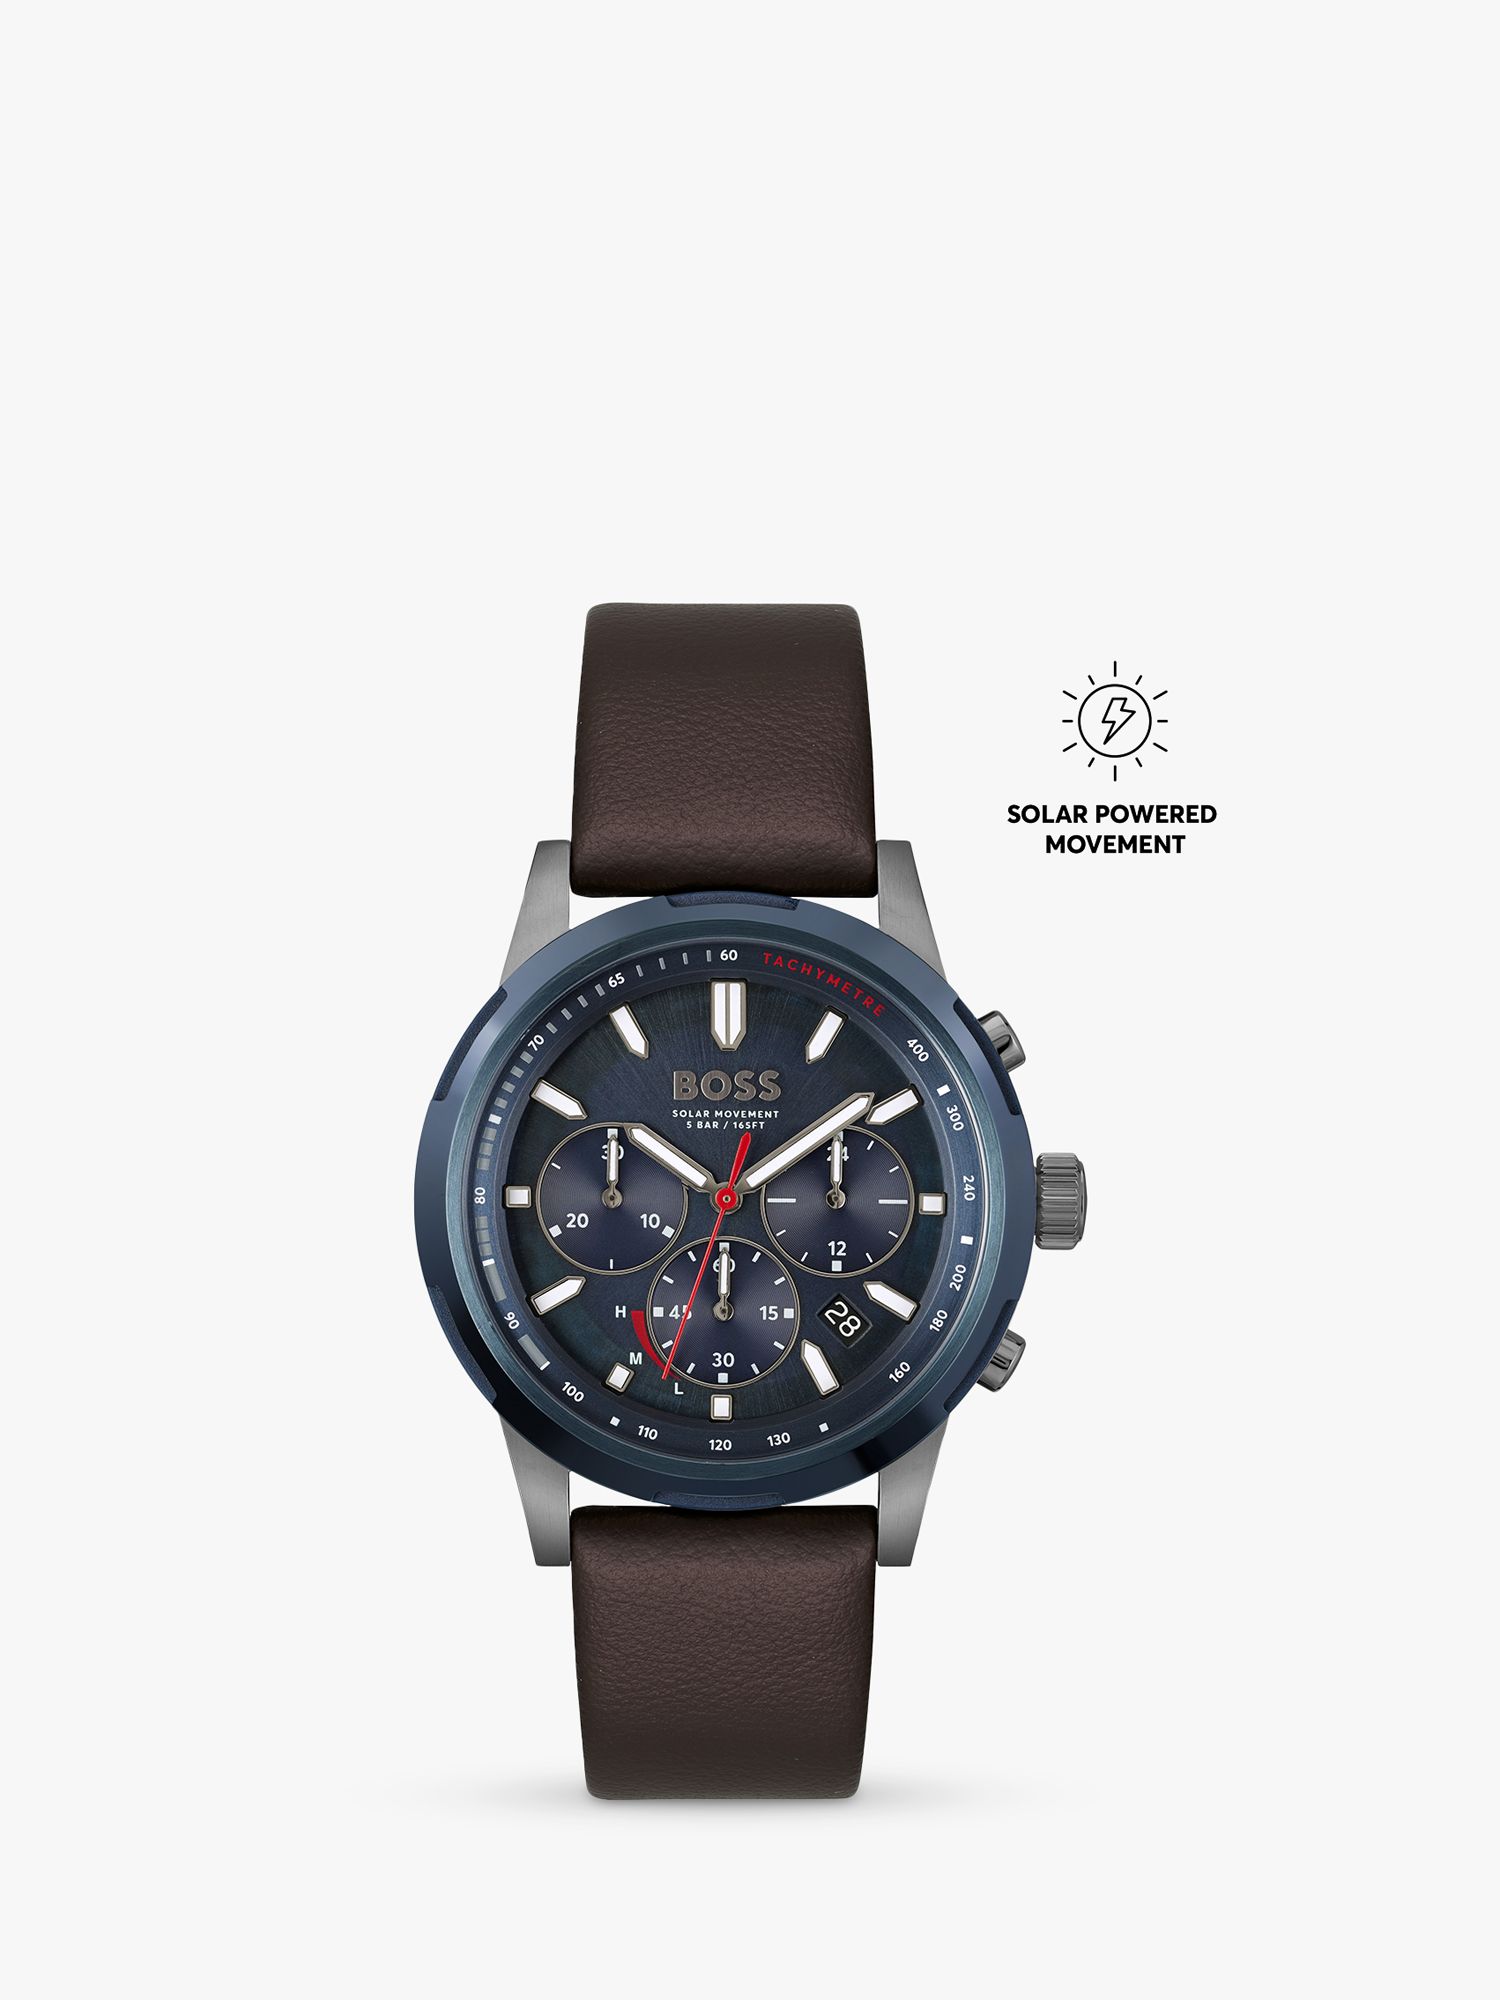 BOSS Men's Solgrade Chronograph Leather Strap Watch, Brown/Blue 1514030 at  John Lewis & Partners